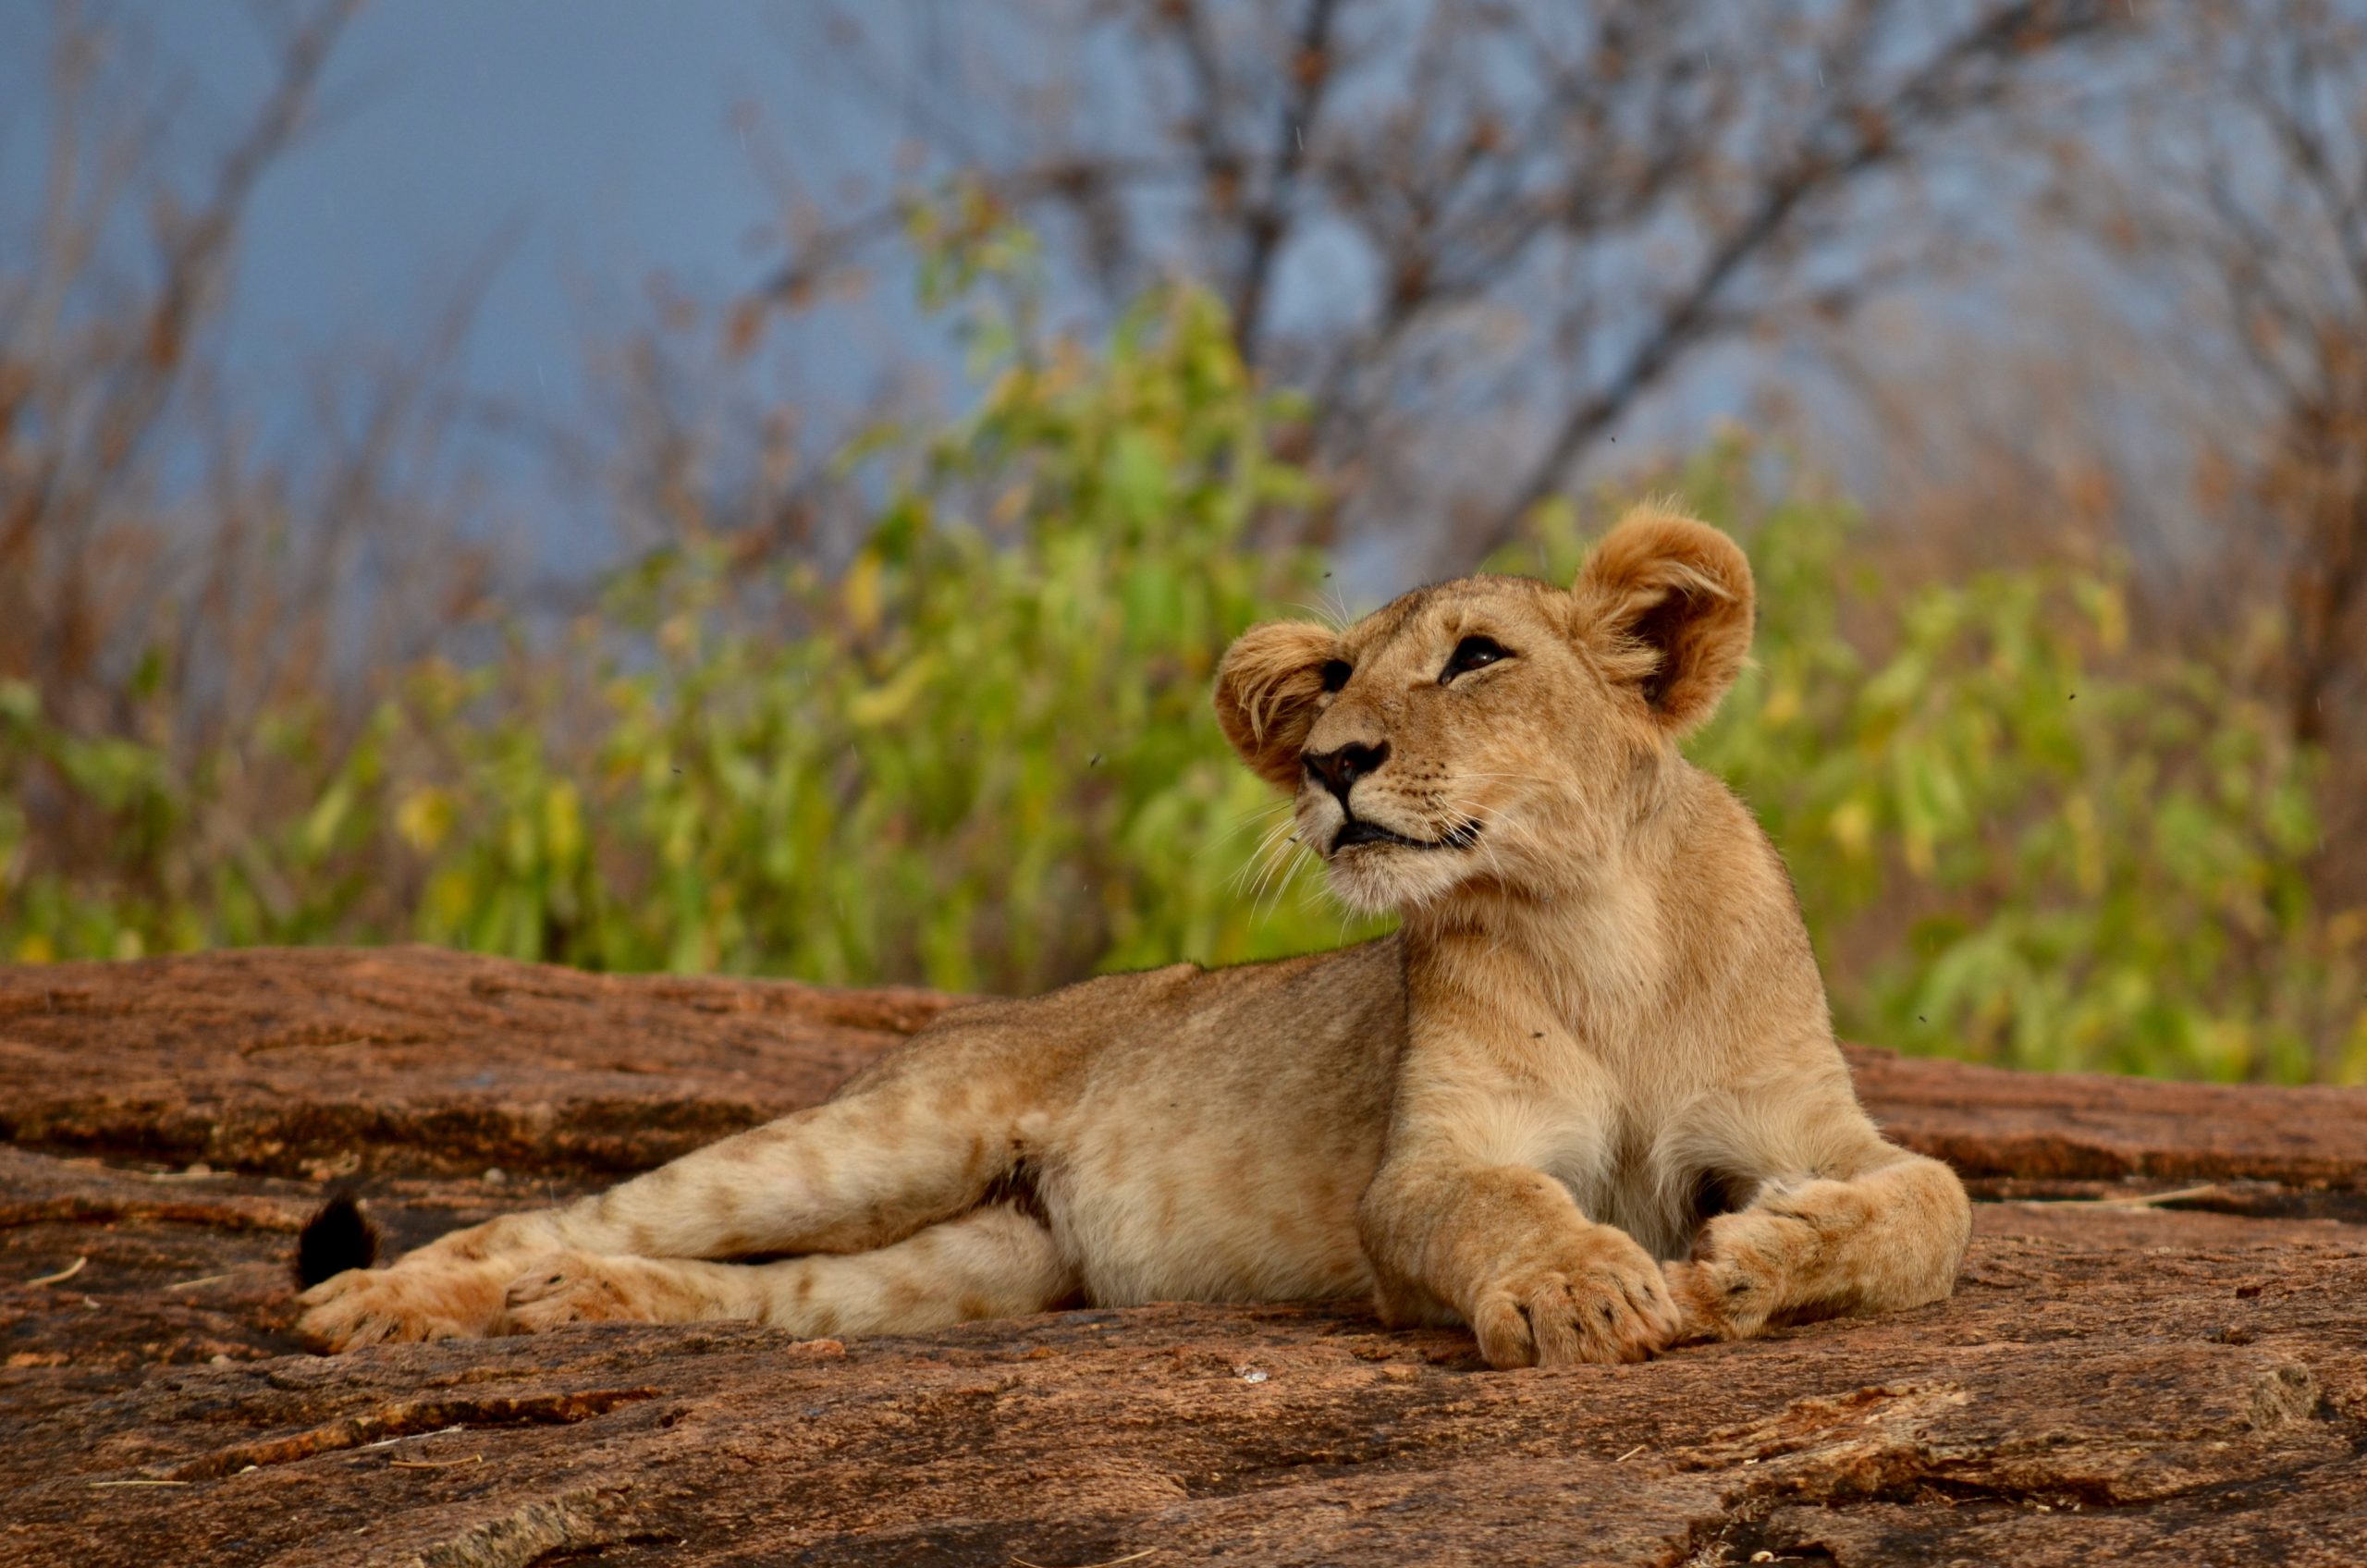 A lion cub lying down on the ground, looking up to the left.